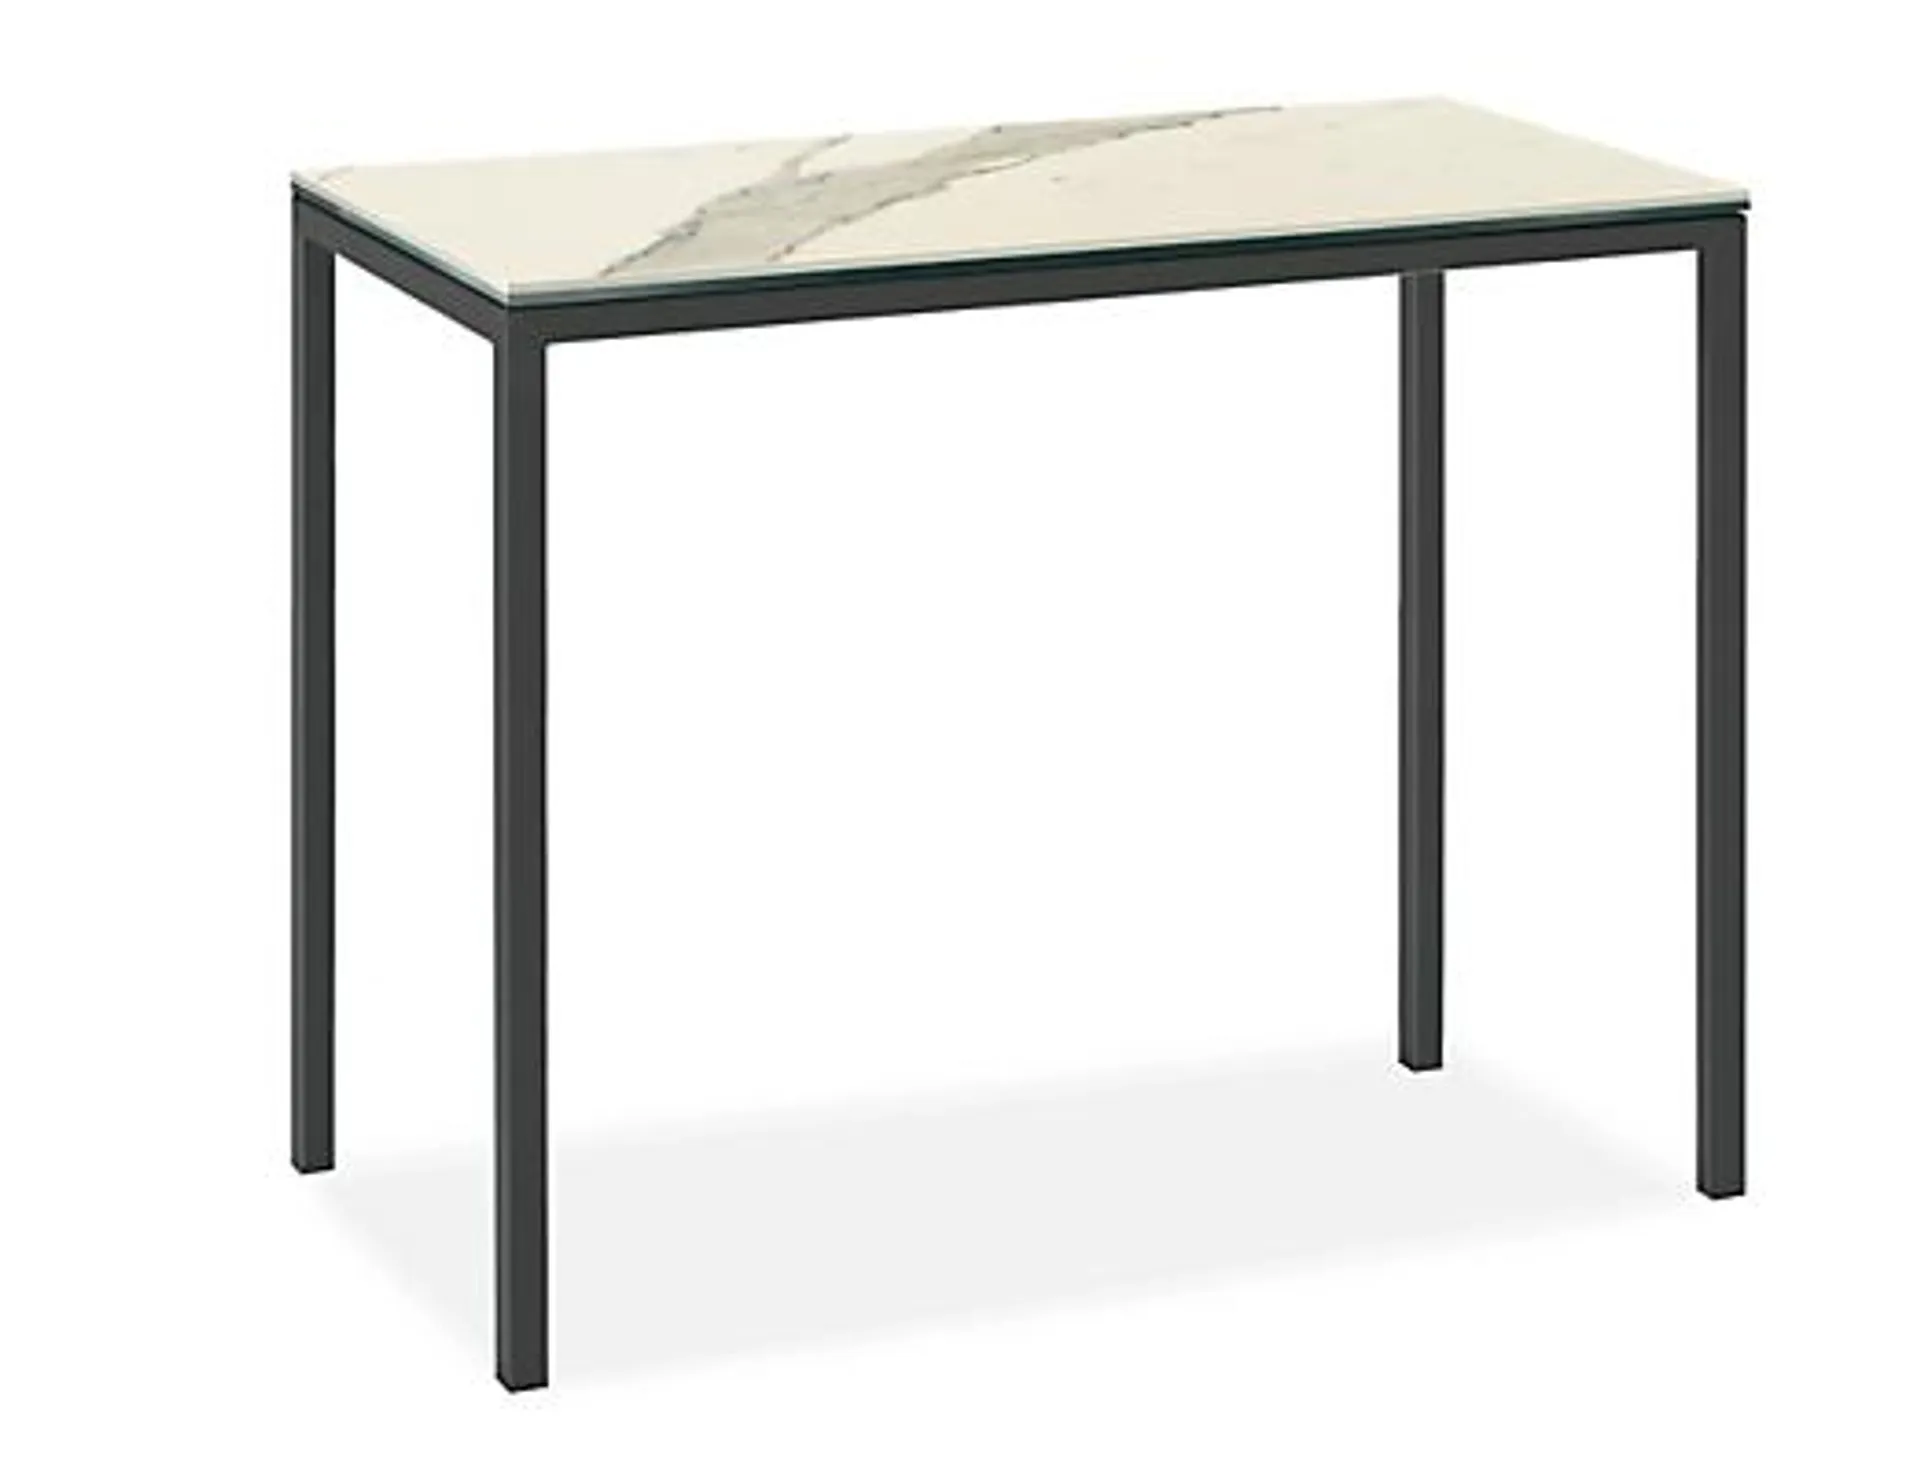 Parsons 36w 16d 22h 1" End Table in Graphite with Marbled White Ceramic Top